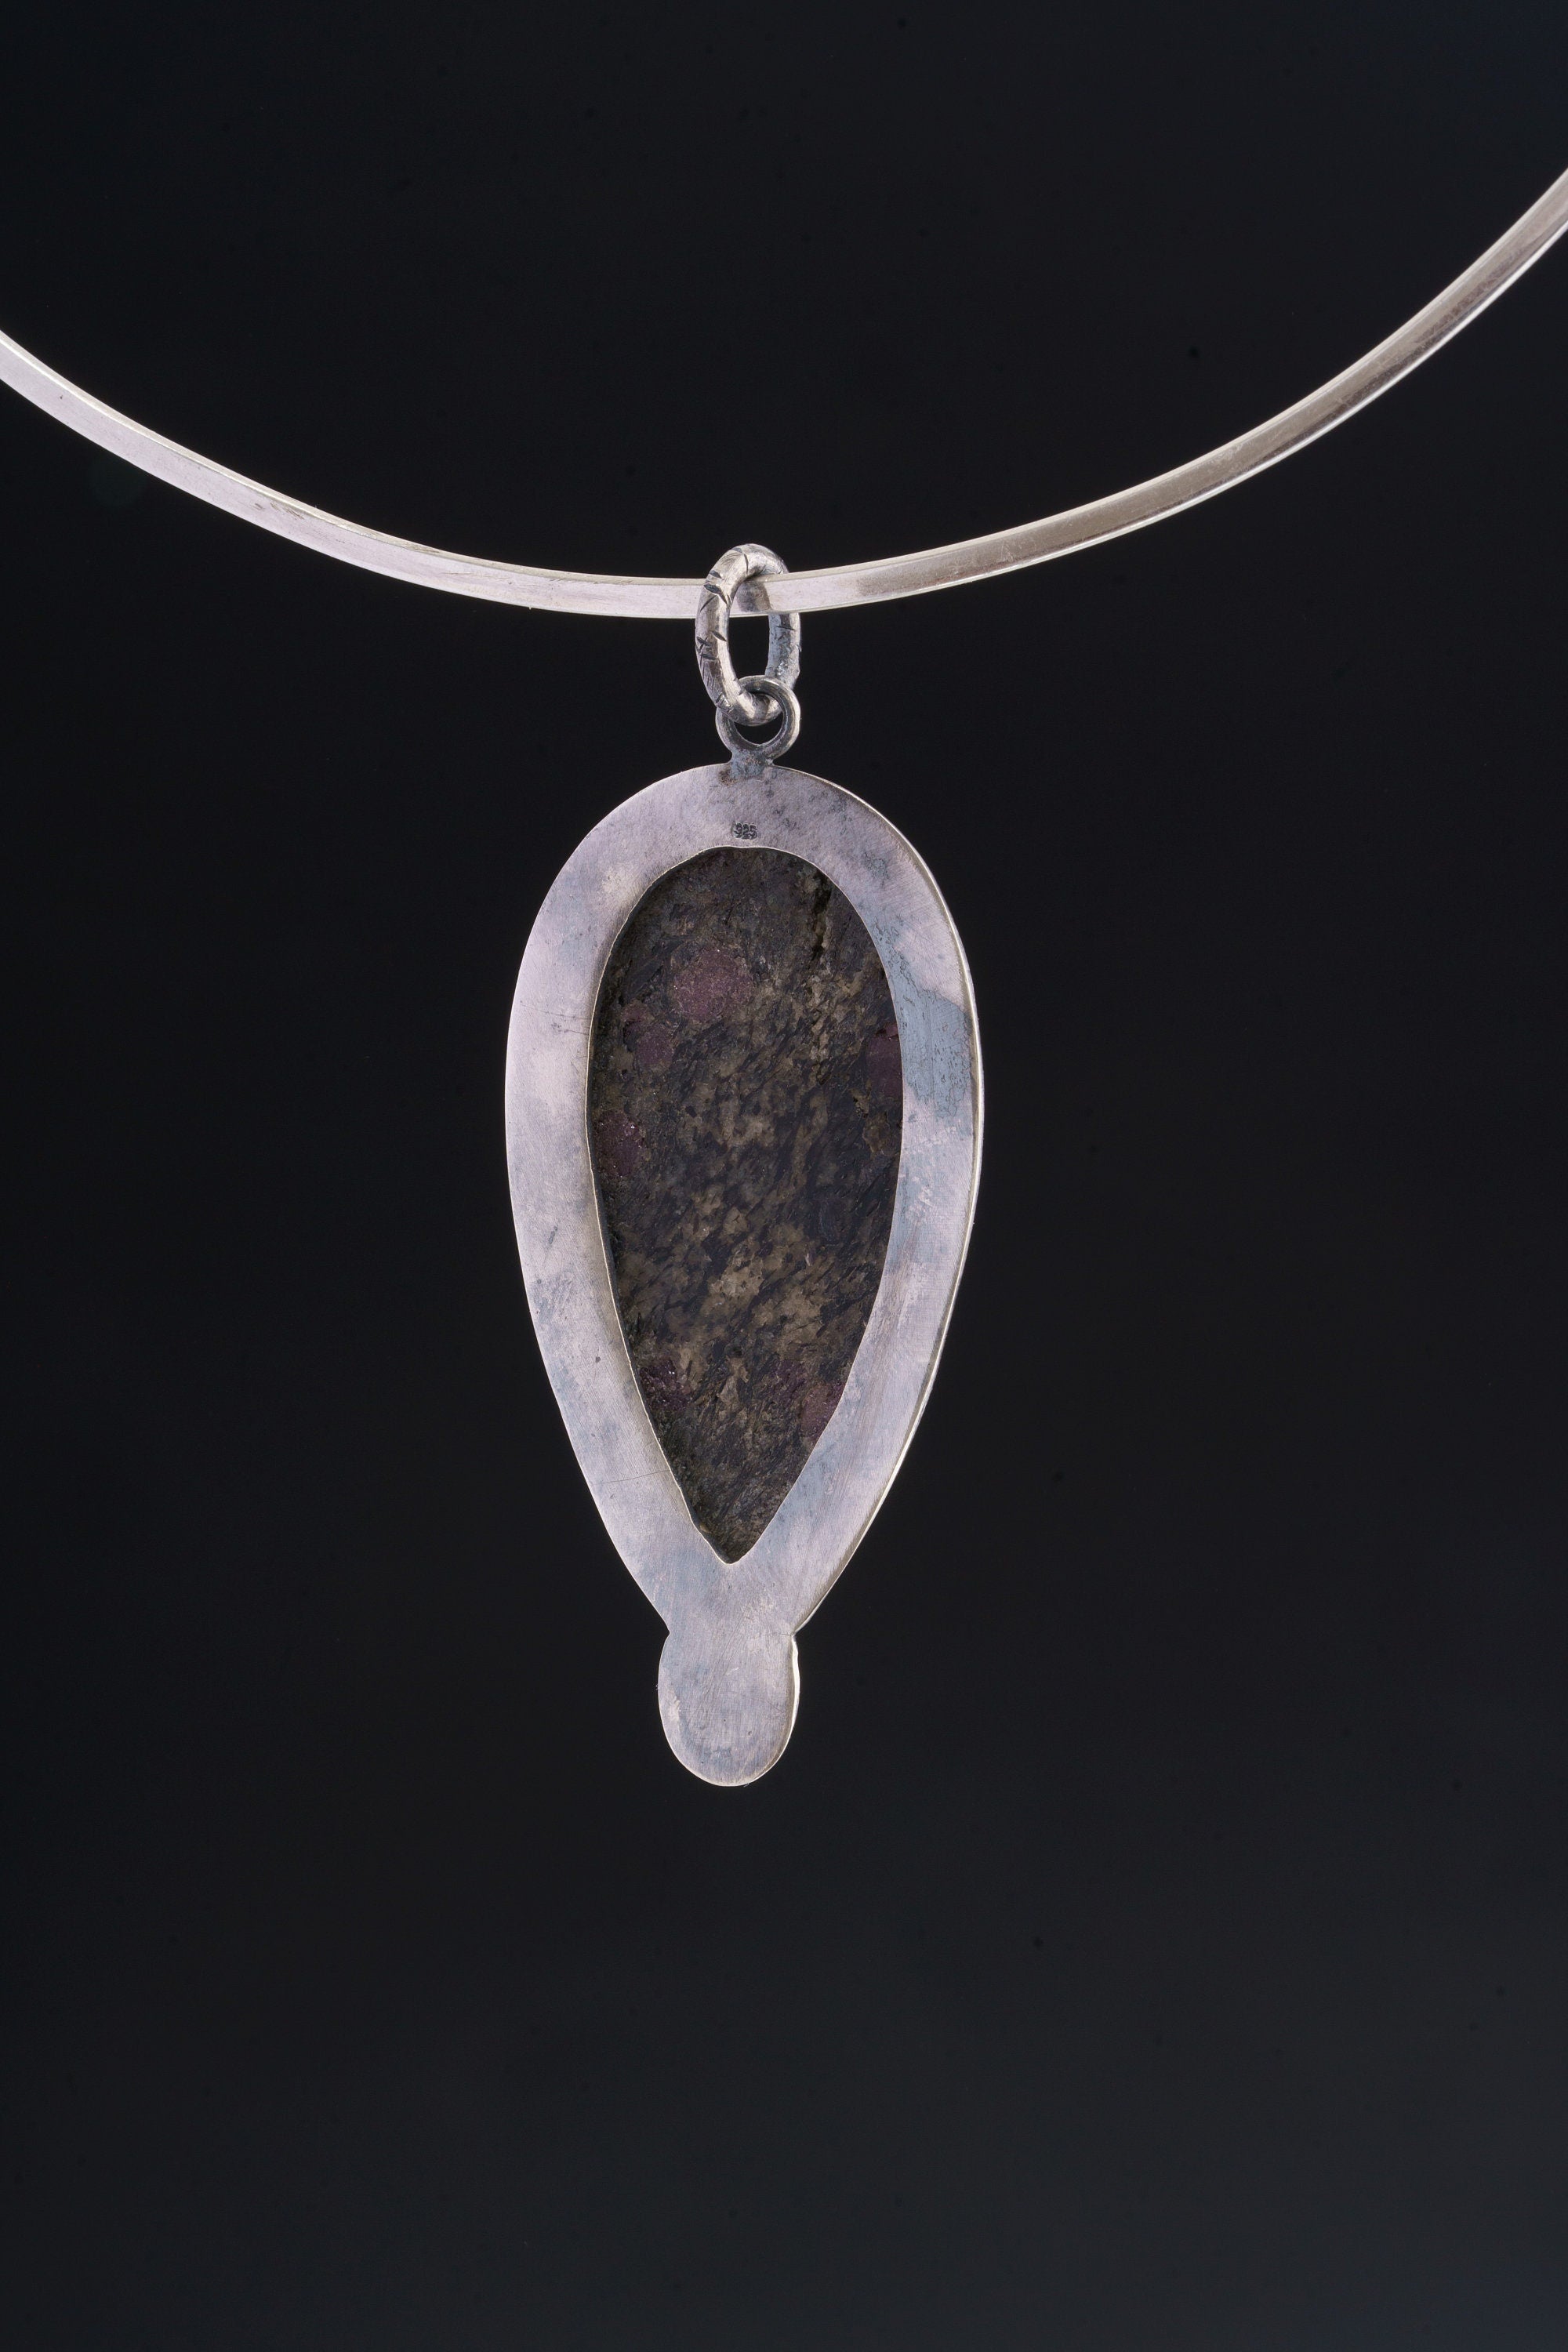 Stunning Balsa Ruby in Black Matrix and Faceted Ethiopian Opal Pendant - Oxidised Sterling Silver with Sun Ray Details